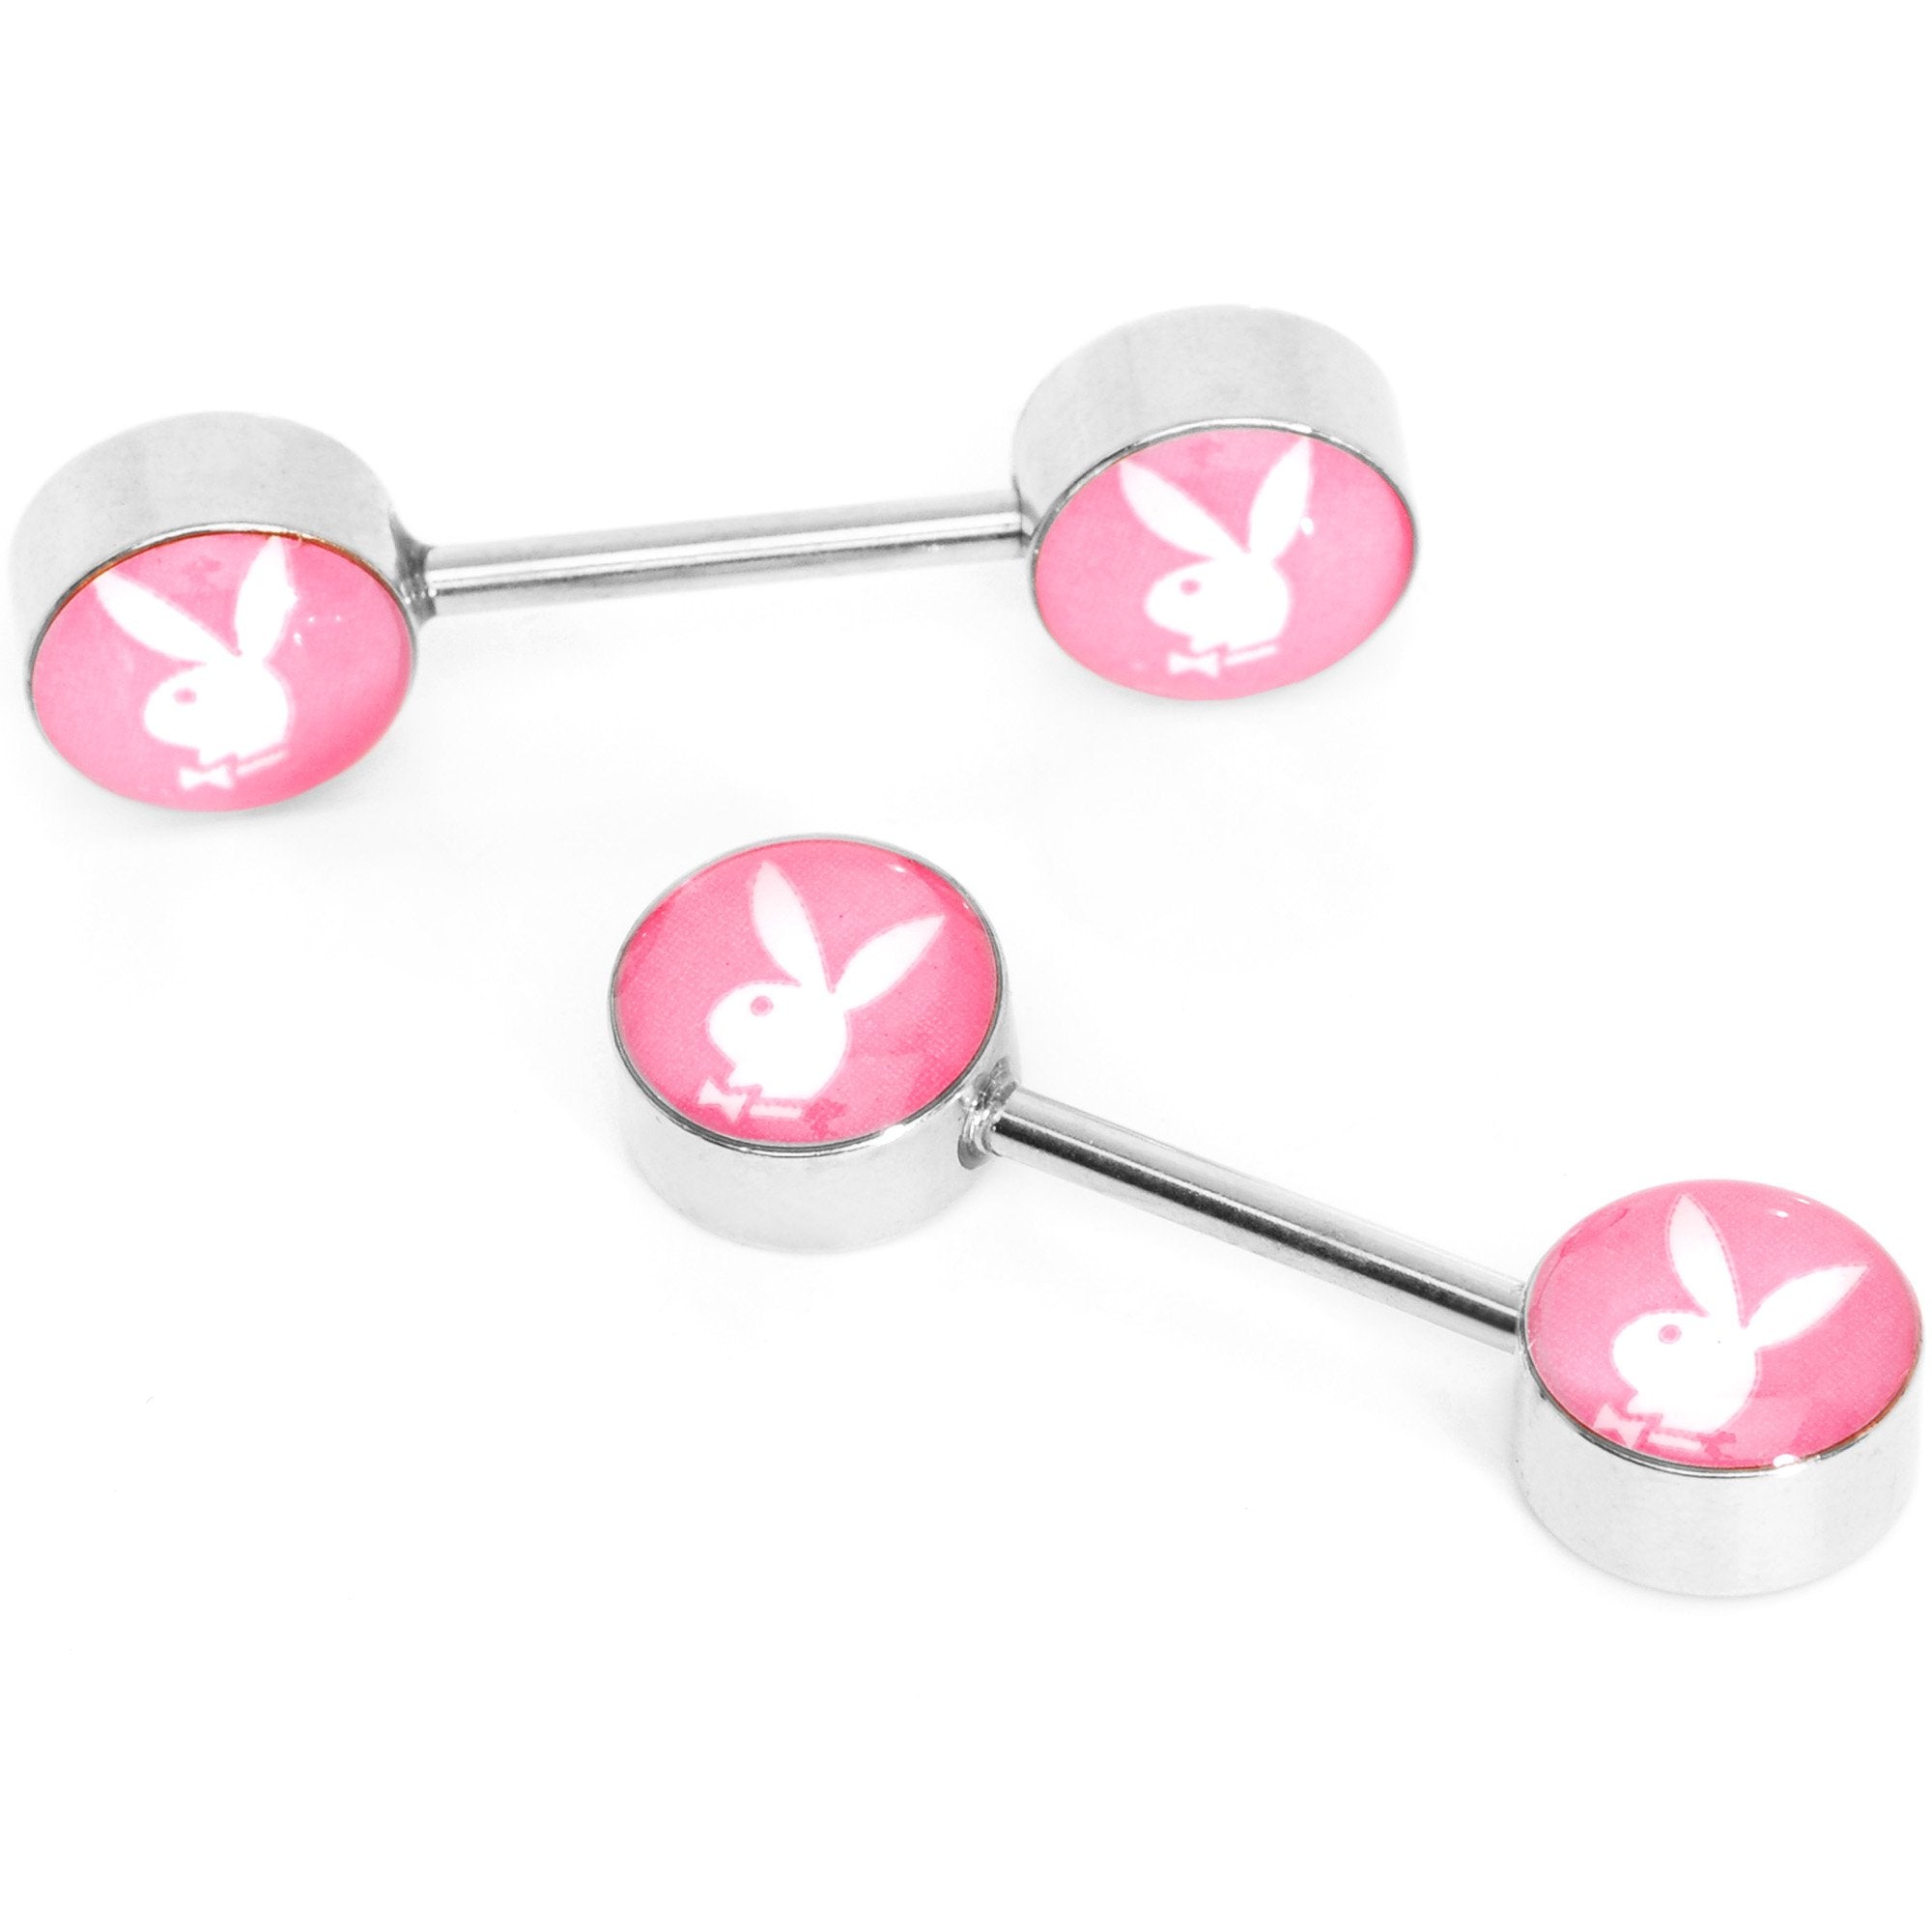 Licensed Pink White Playboy Bunny Barbell Nipple Ring Set